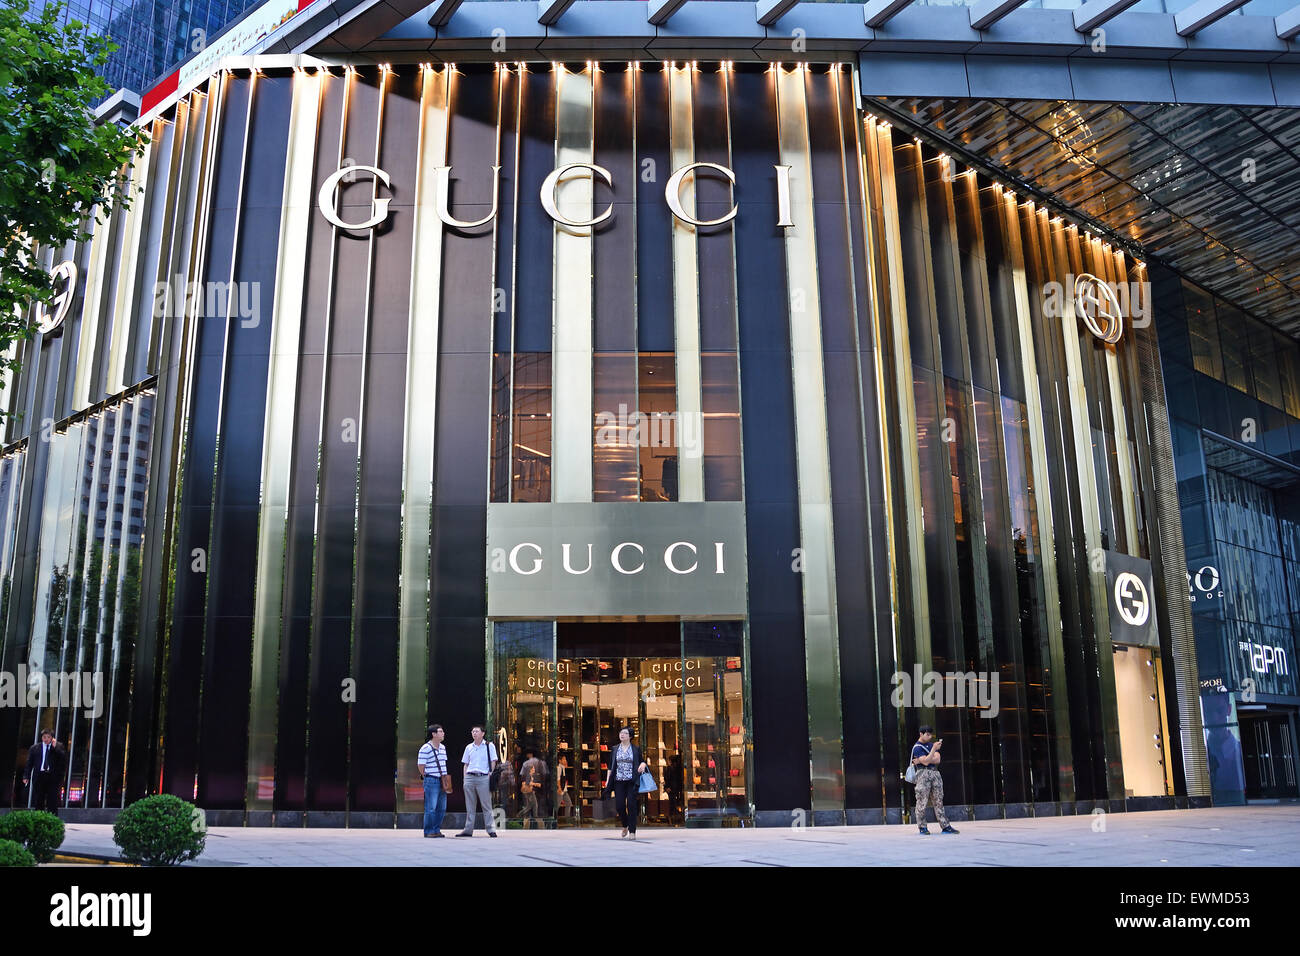 Gucci Store China High Resolution Stock Photography and Images - Alamy